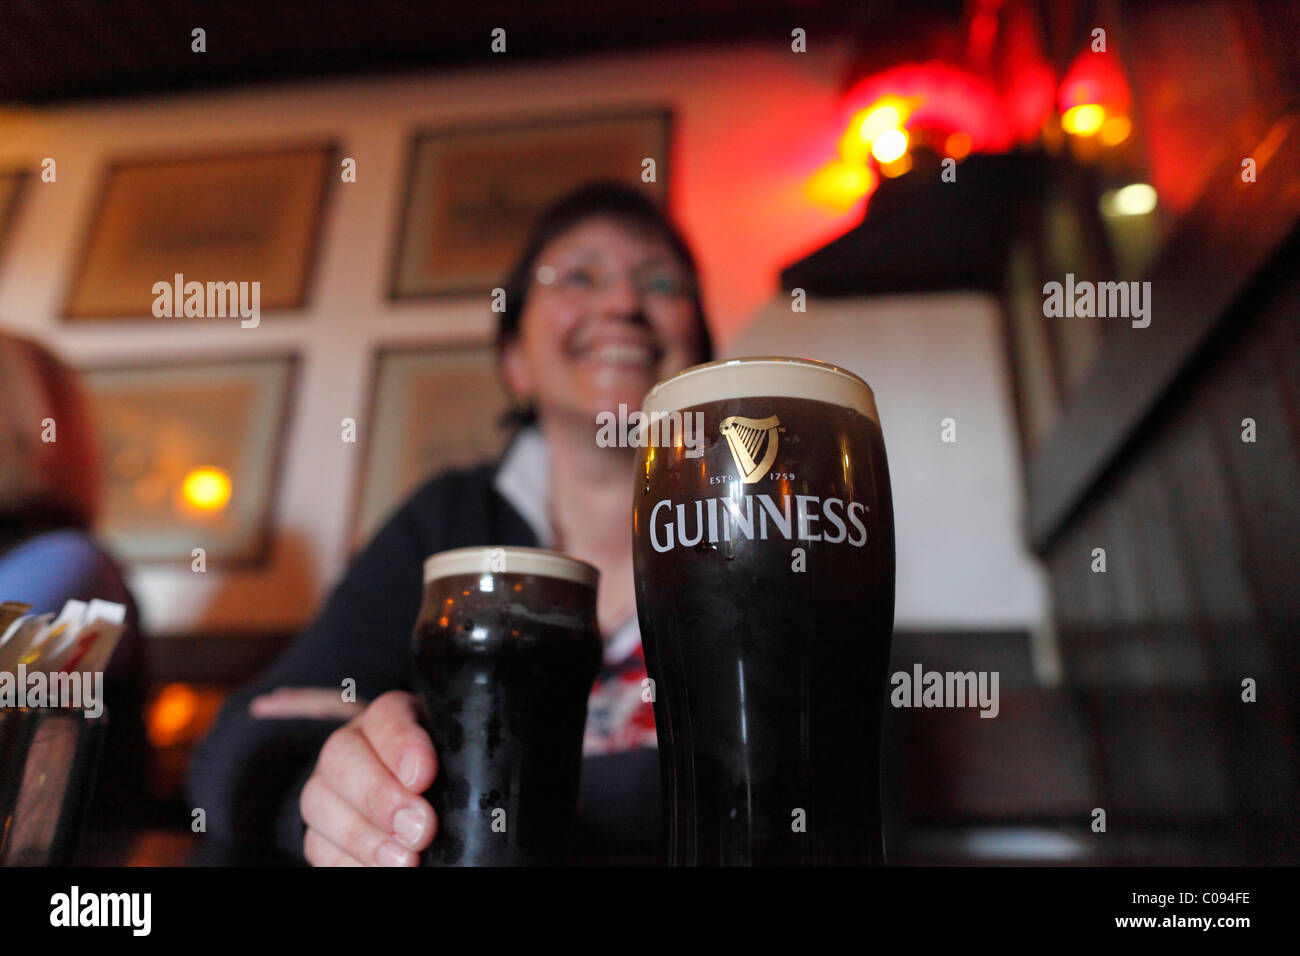 Pint of Guinness stout, Durty Nelly's pub, Bunratty, County Clare, Ireland, British Isles, Europe Stock Photo